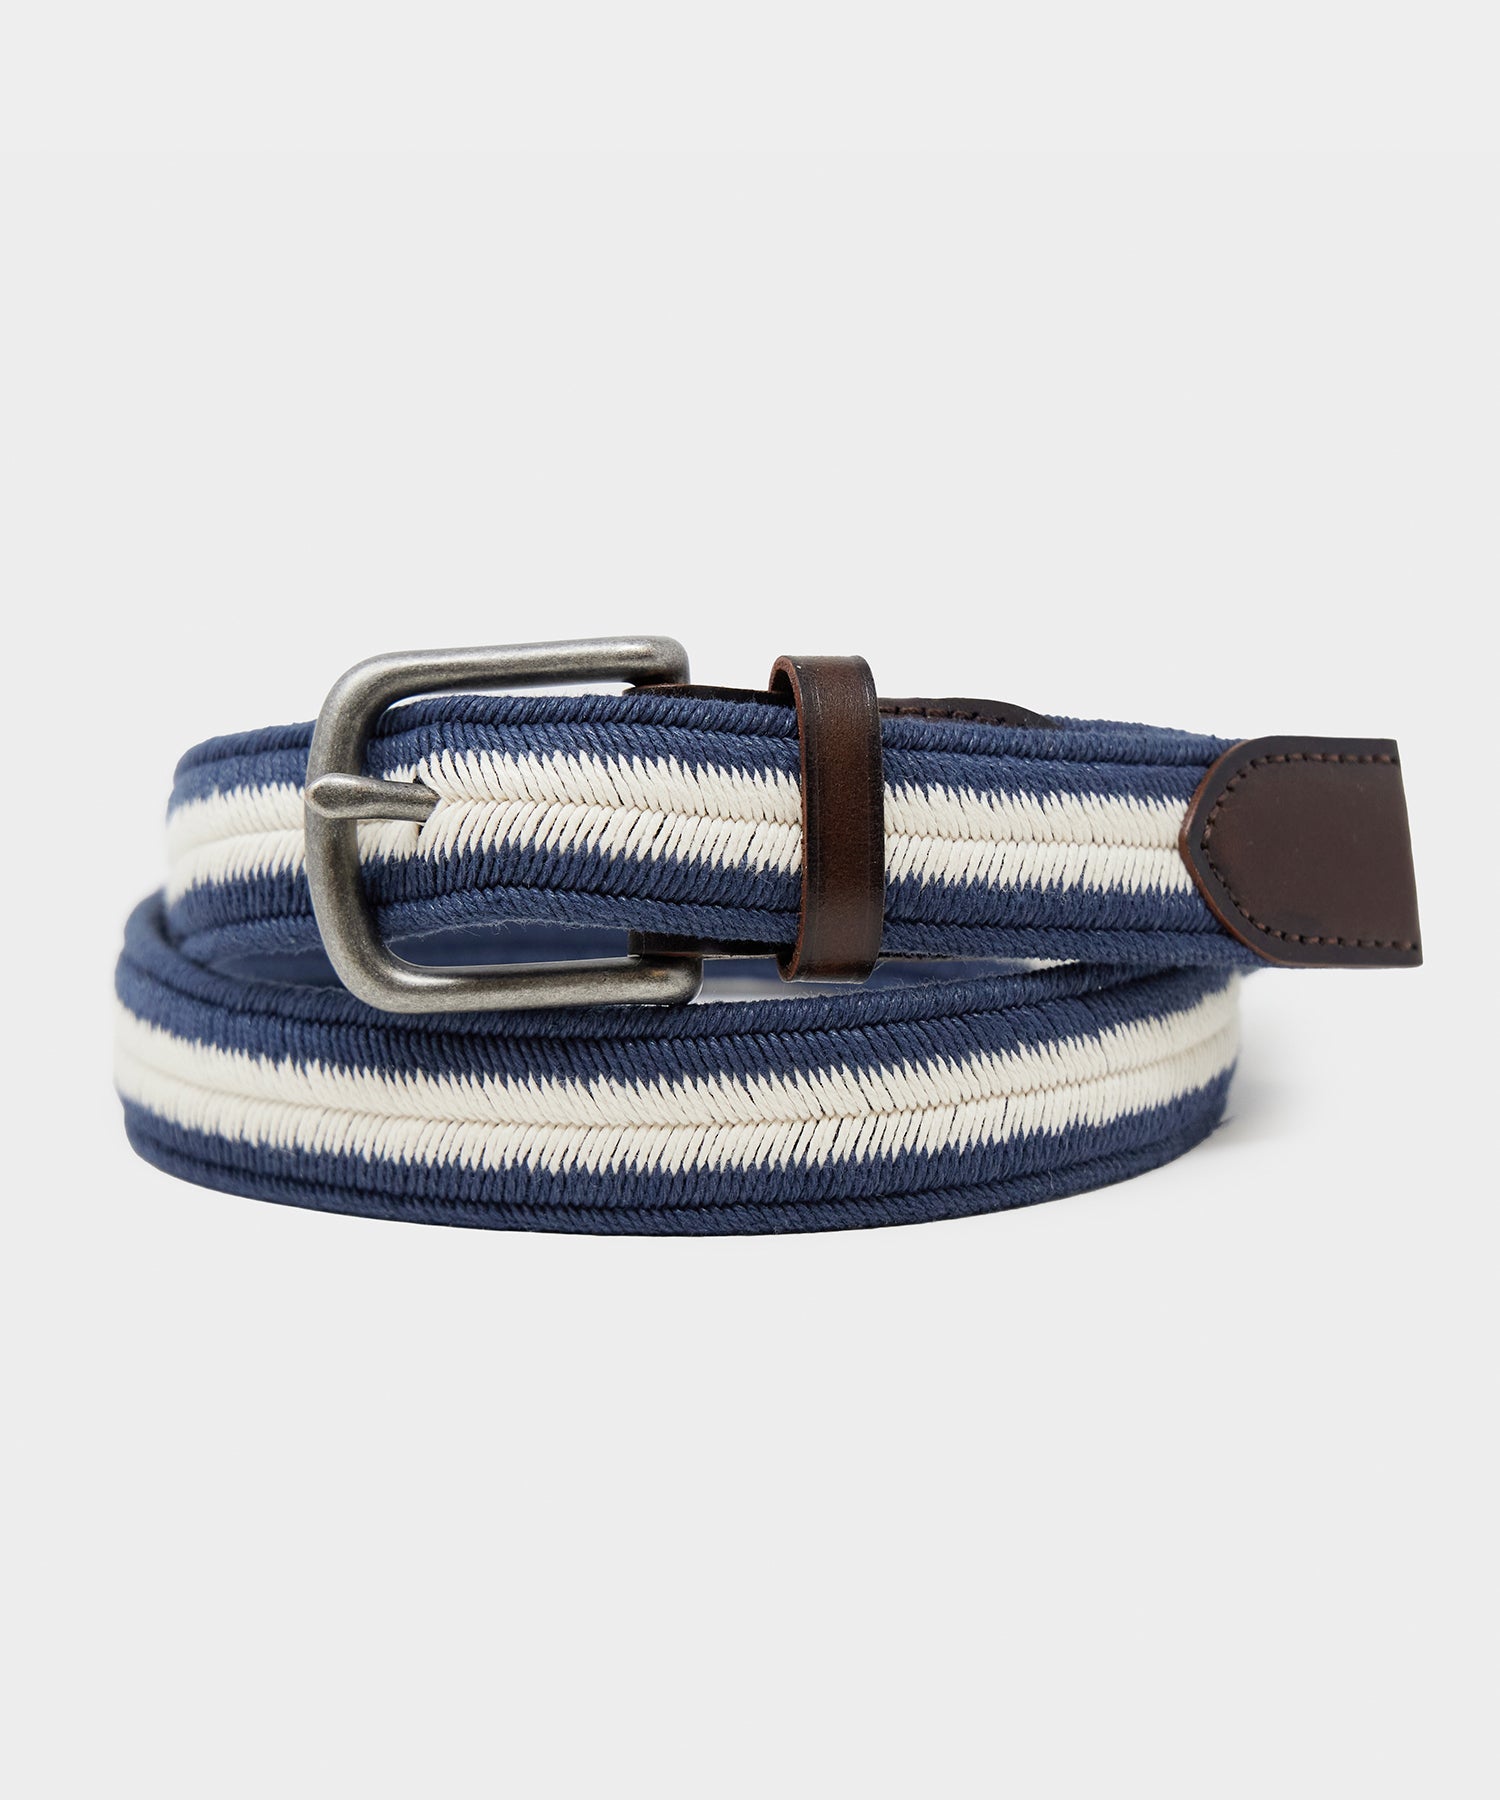 Striped Stretch Cotton Braided Belt in Navy and White Stripe